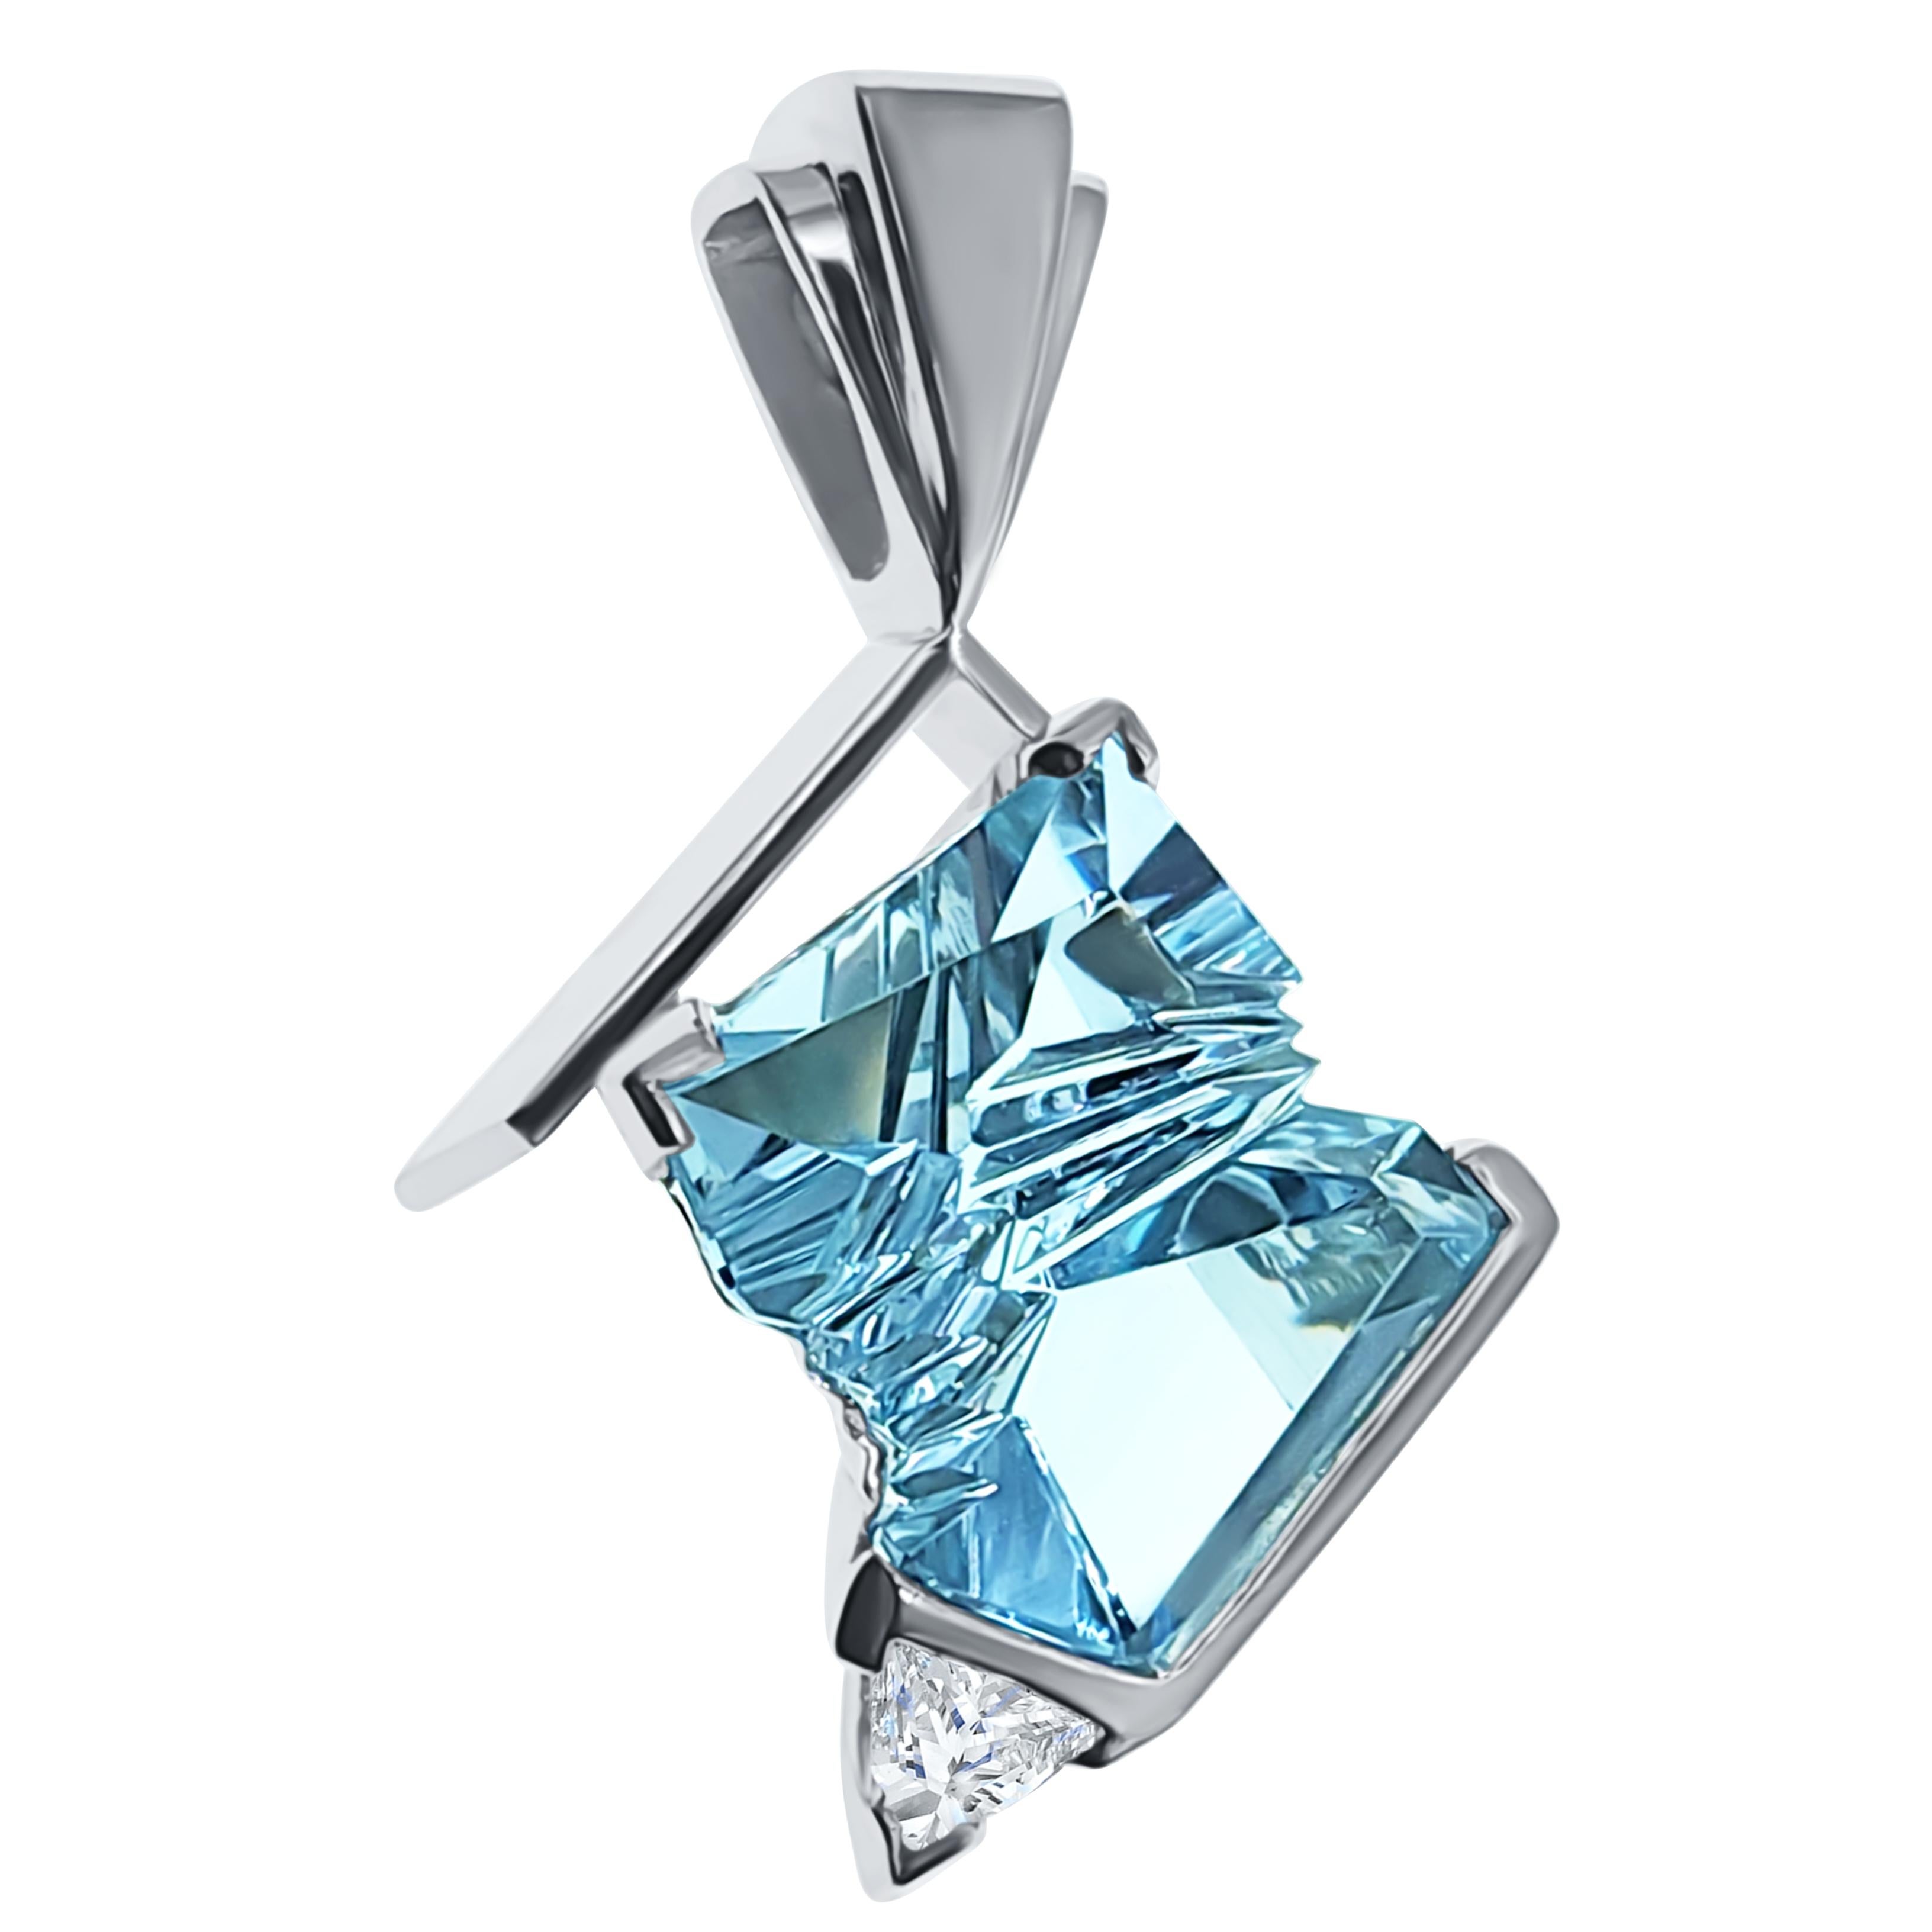 This handcrafted one-of-a-kind pendant by renowned goldsmith, Martha Richter, holds a rare 9.8 carat clean aquamarine, fantasy cut by world famous Bernd Munsteiner. The angular planes of the Aquamarine are reflected on angles of of the 14K white